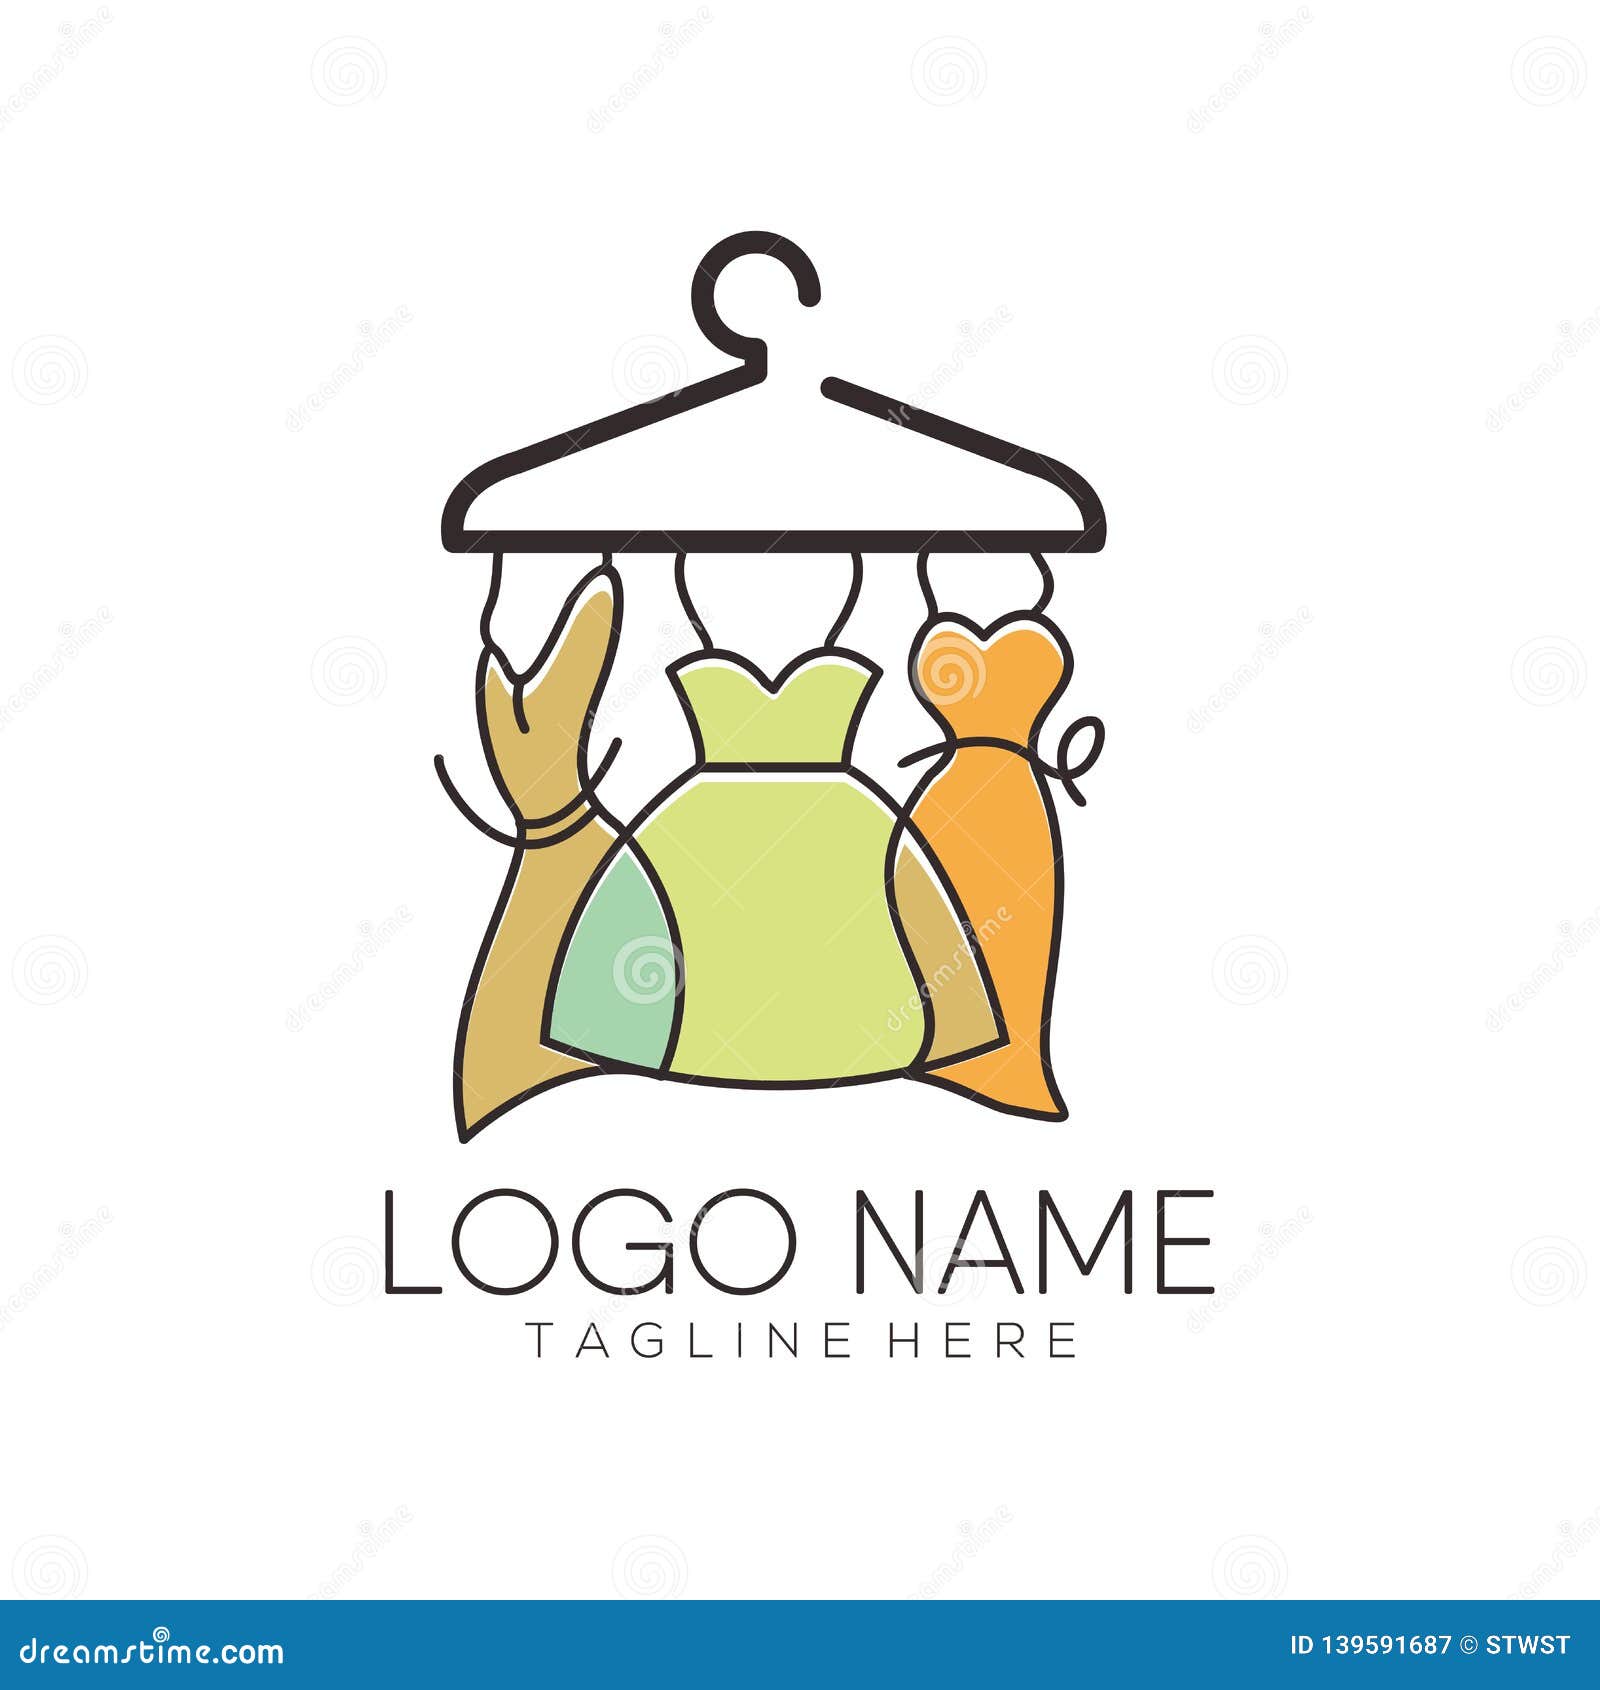 Personal fashion stylist online, vector illustration. Fashion consultant  service in large smartphone, woman character design Stock Vector by  ©vectordreamsmachine 383836084